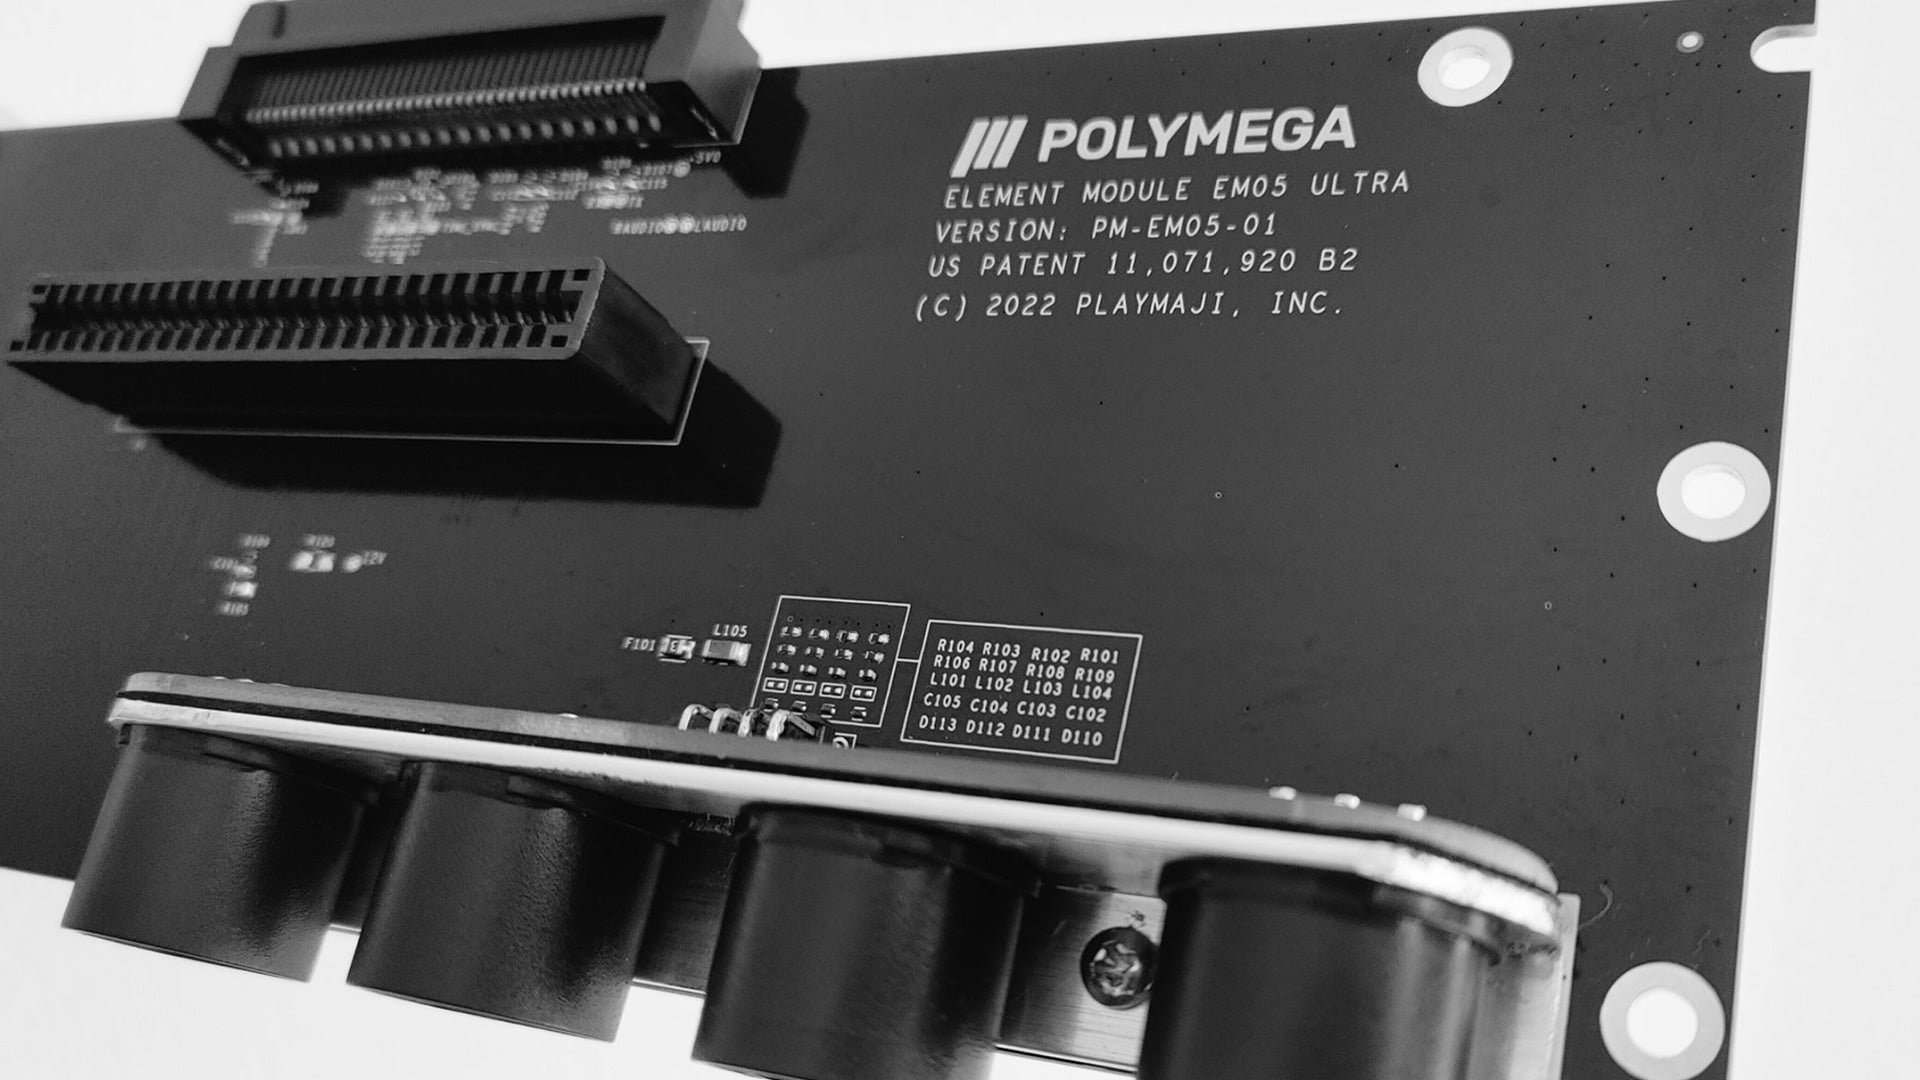 Polymega teases its upcoming N64 support | VG247